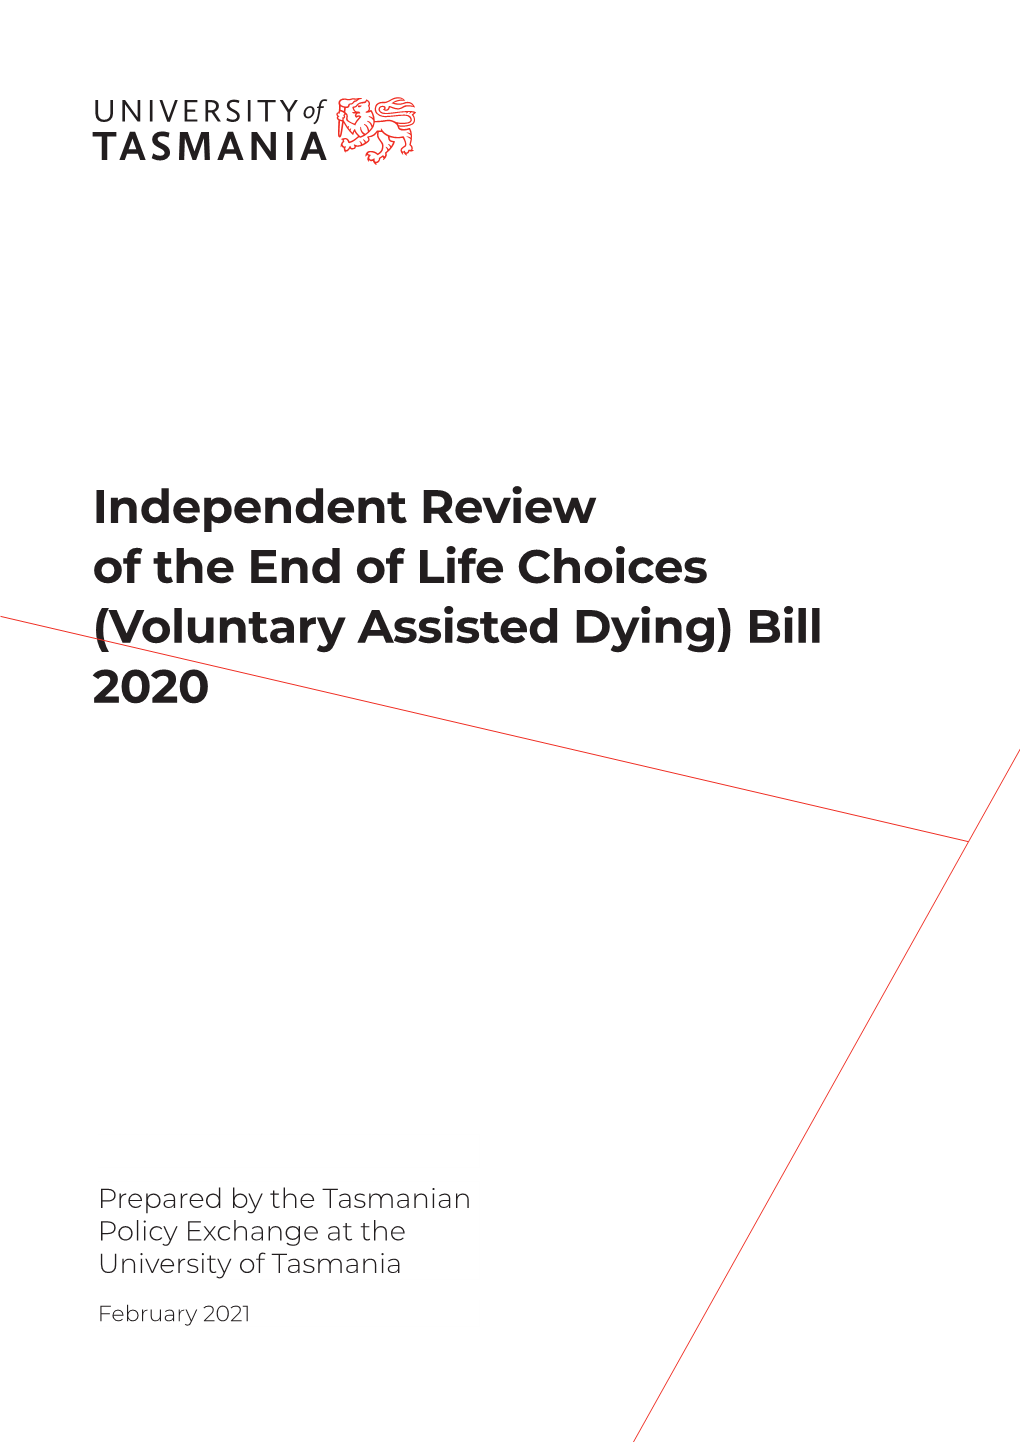 Independent Review of the End of Life Choices (Voluntary Assisted Dying) Bill 2020